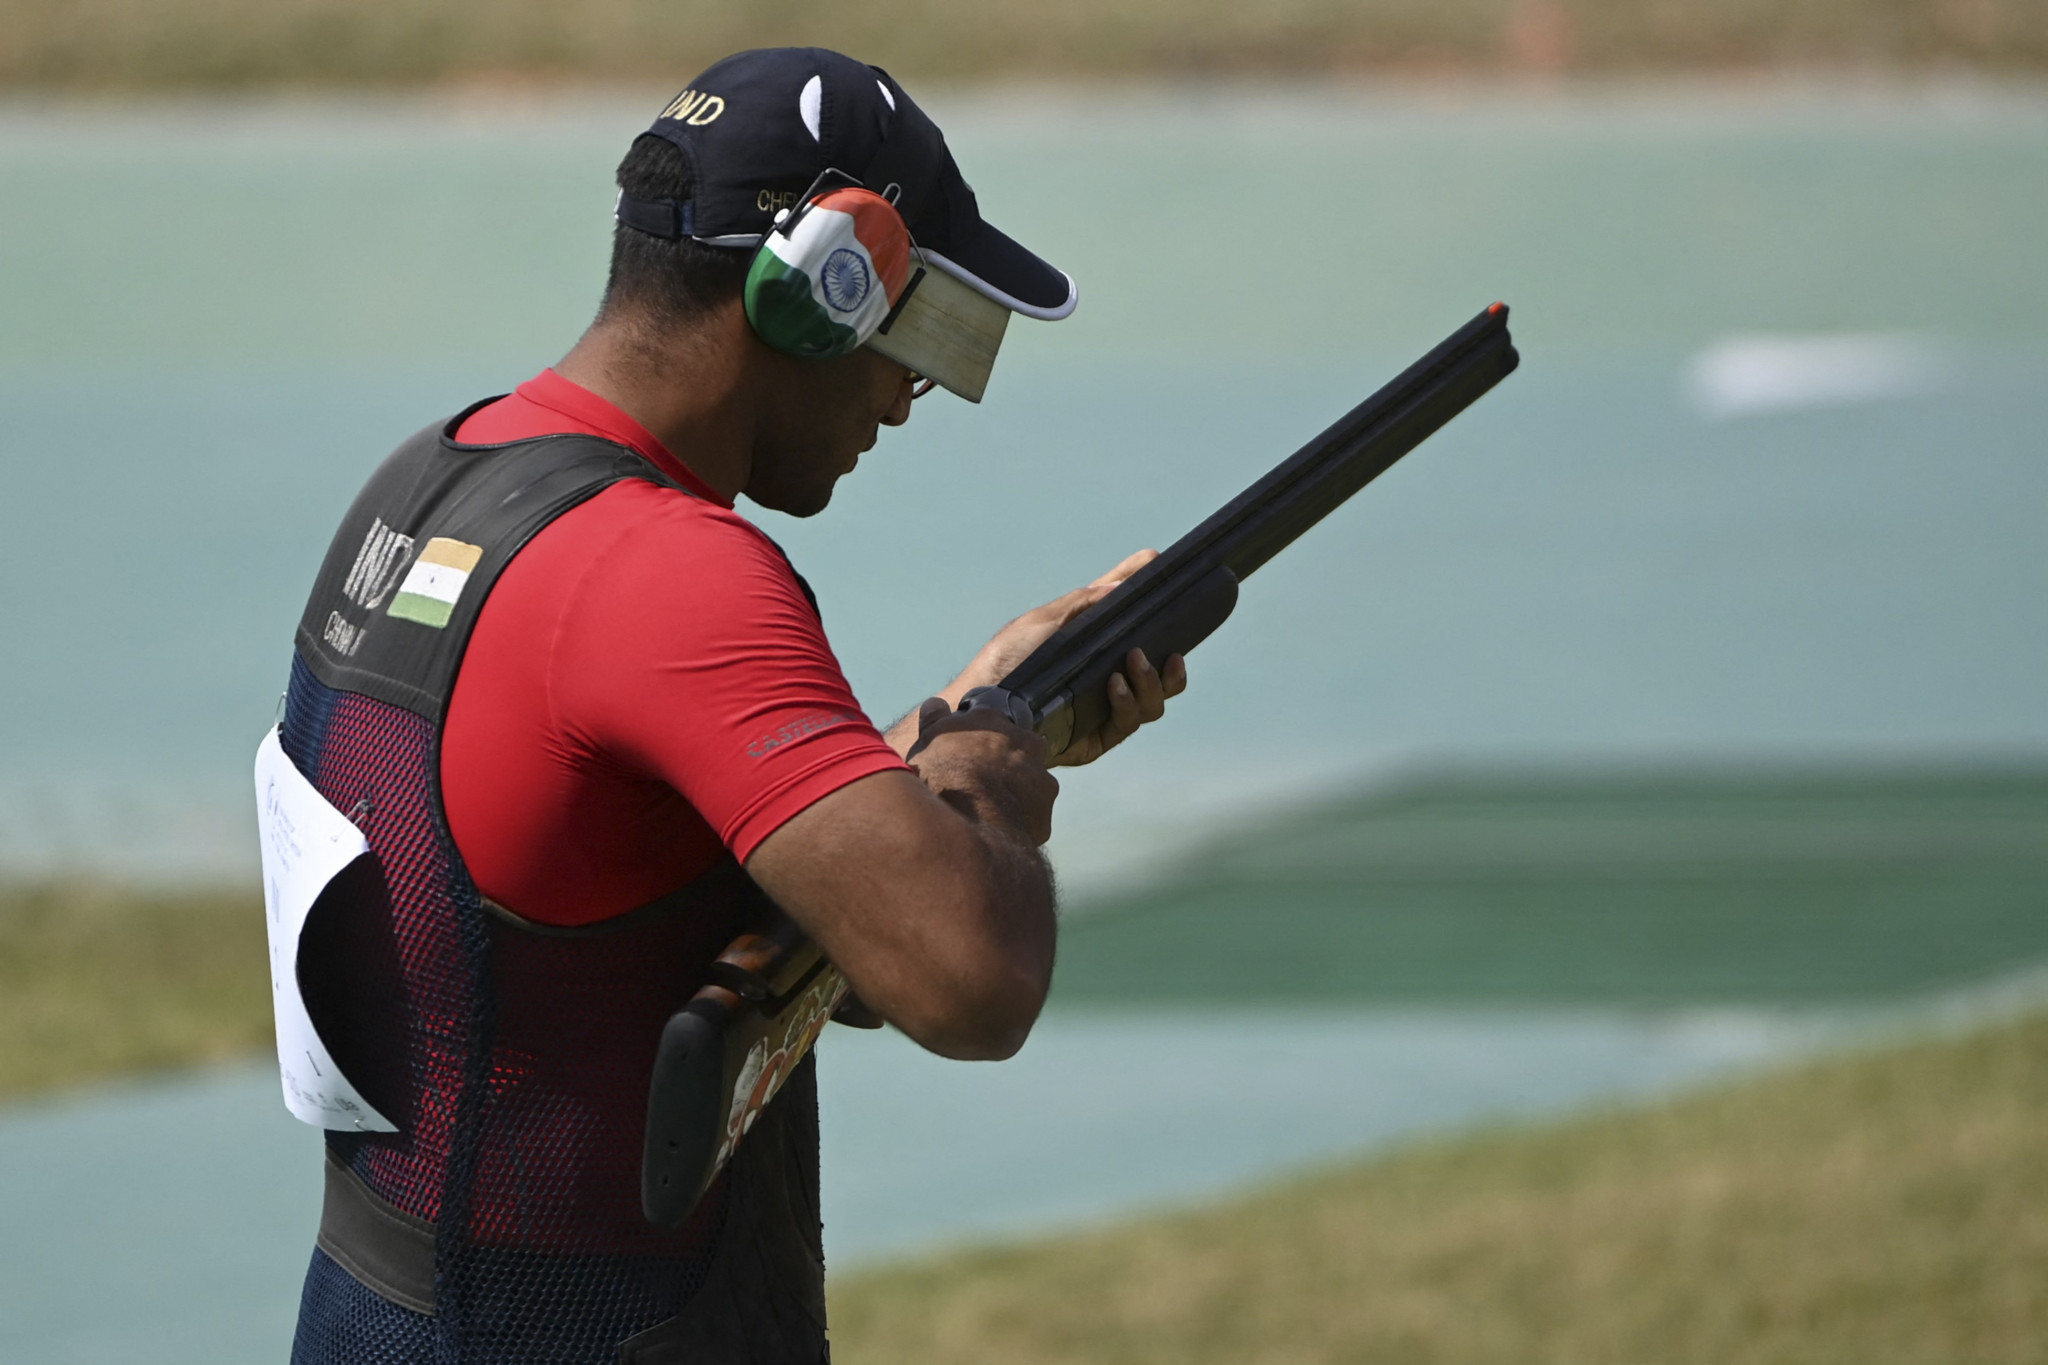 IOA hopes to discuss Commonwealth Archery and Shooting Championships amid uncertainty